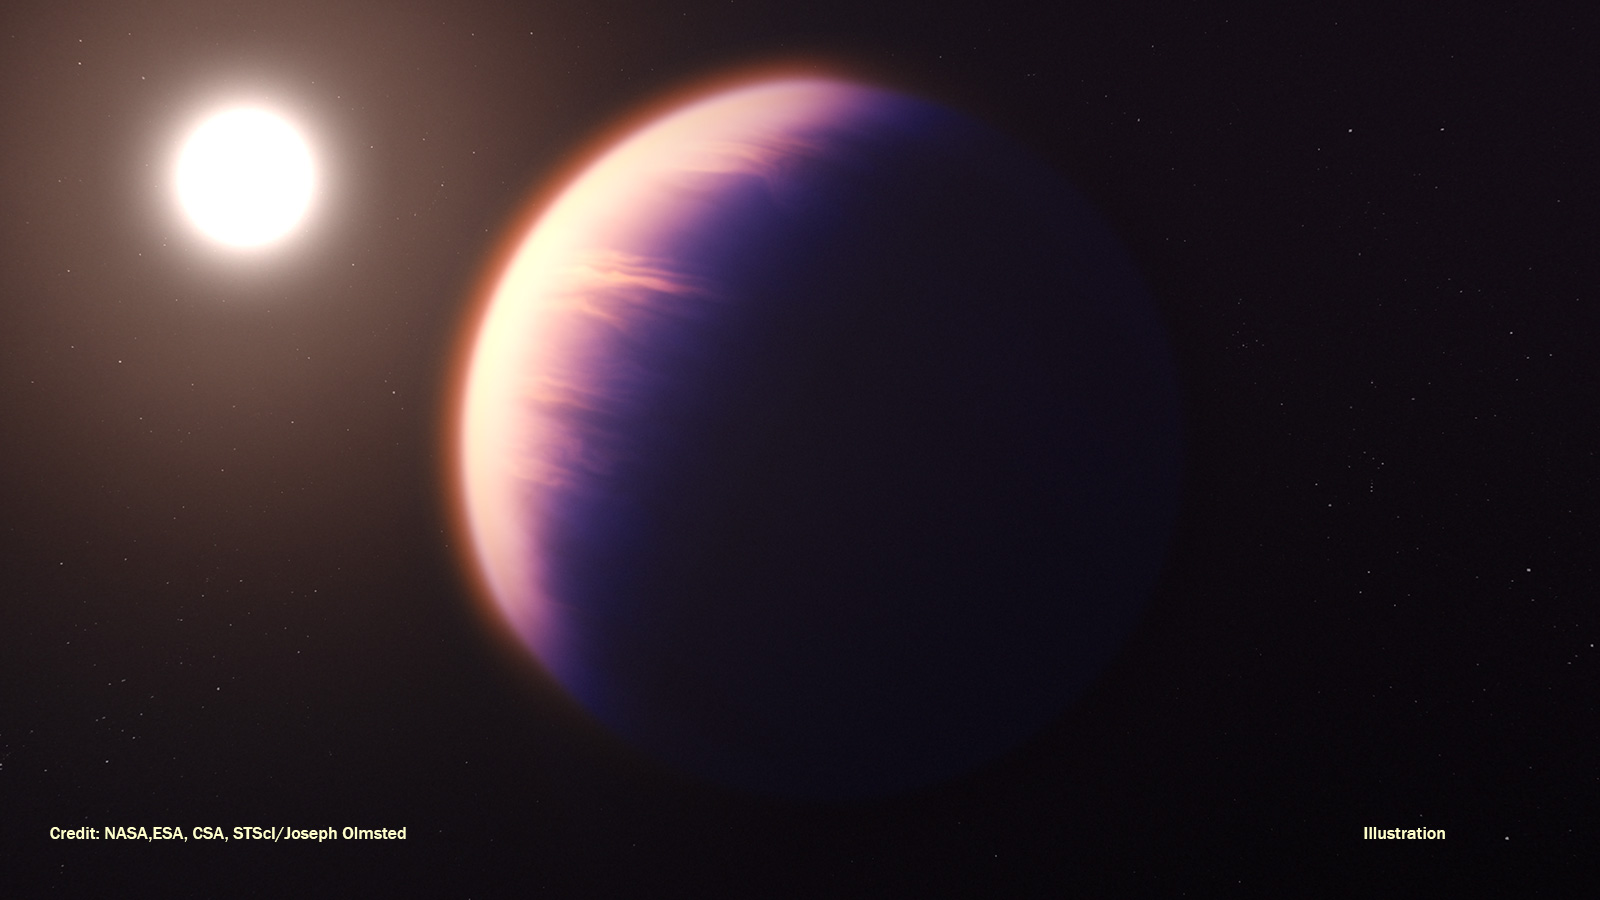 slide 1 - An illustration of an exoplanet shows a hazy, orangish world very close to its nearby star in the black of space.